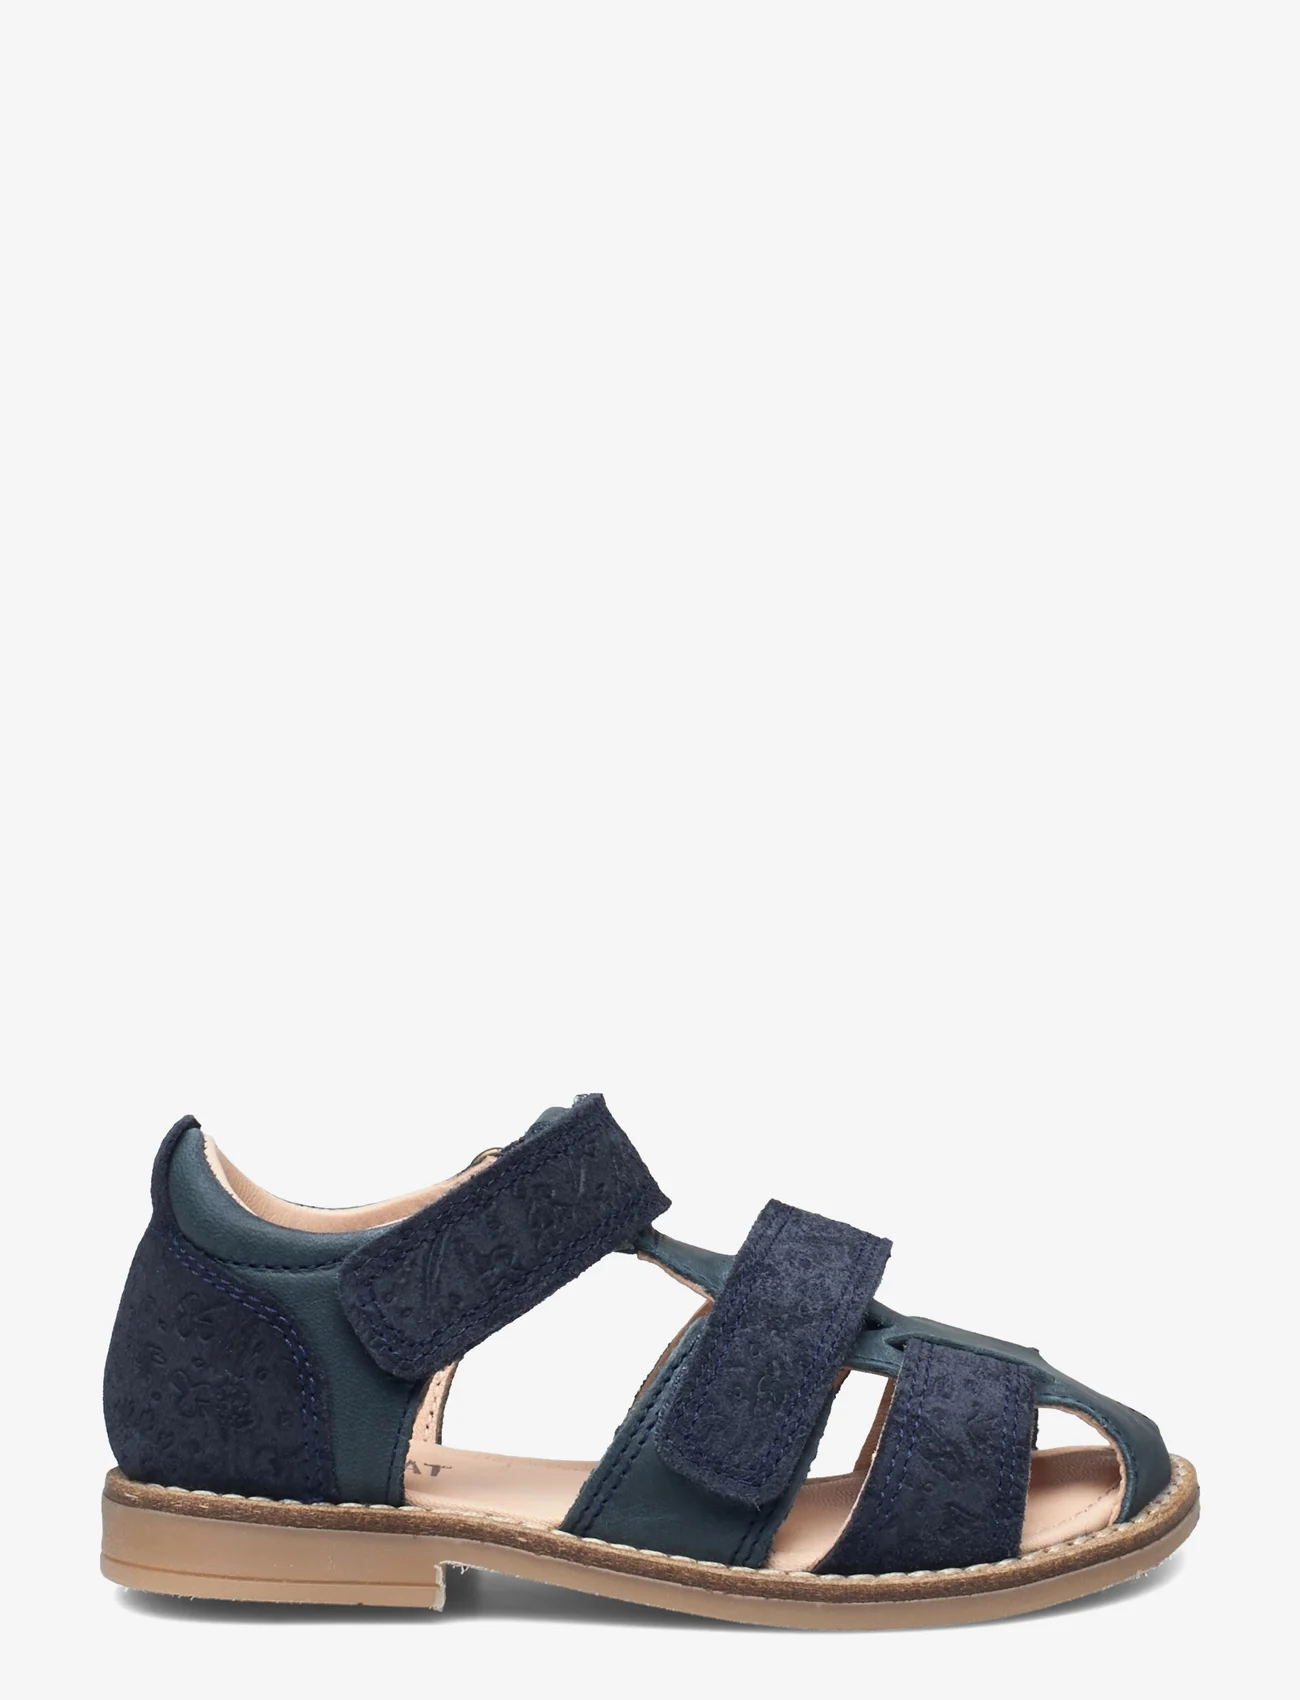 Wheat - Macey closed toe - sommarfynd - navy - 1